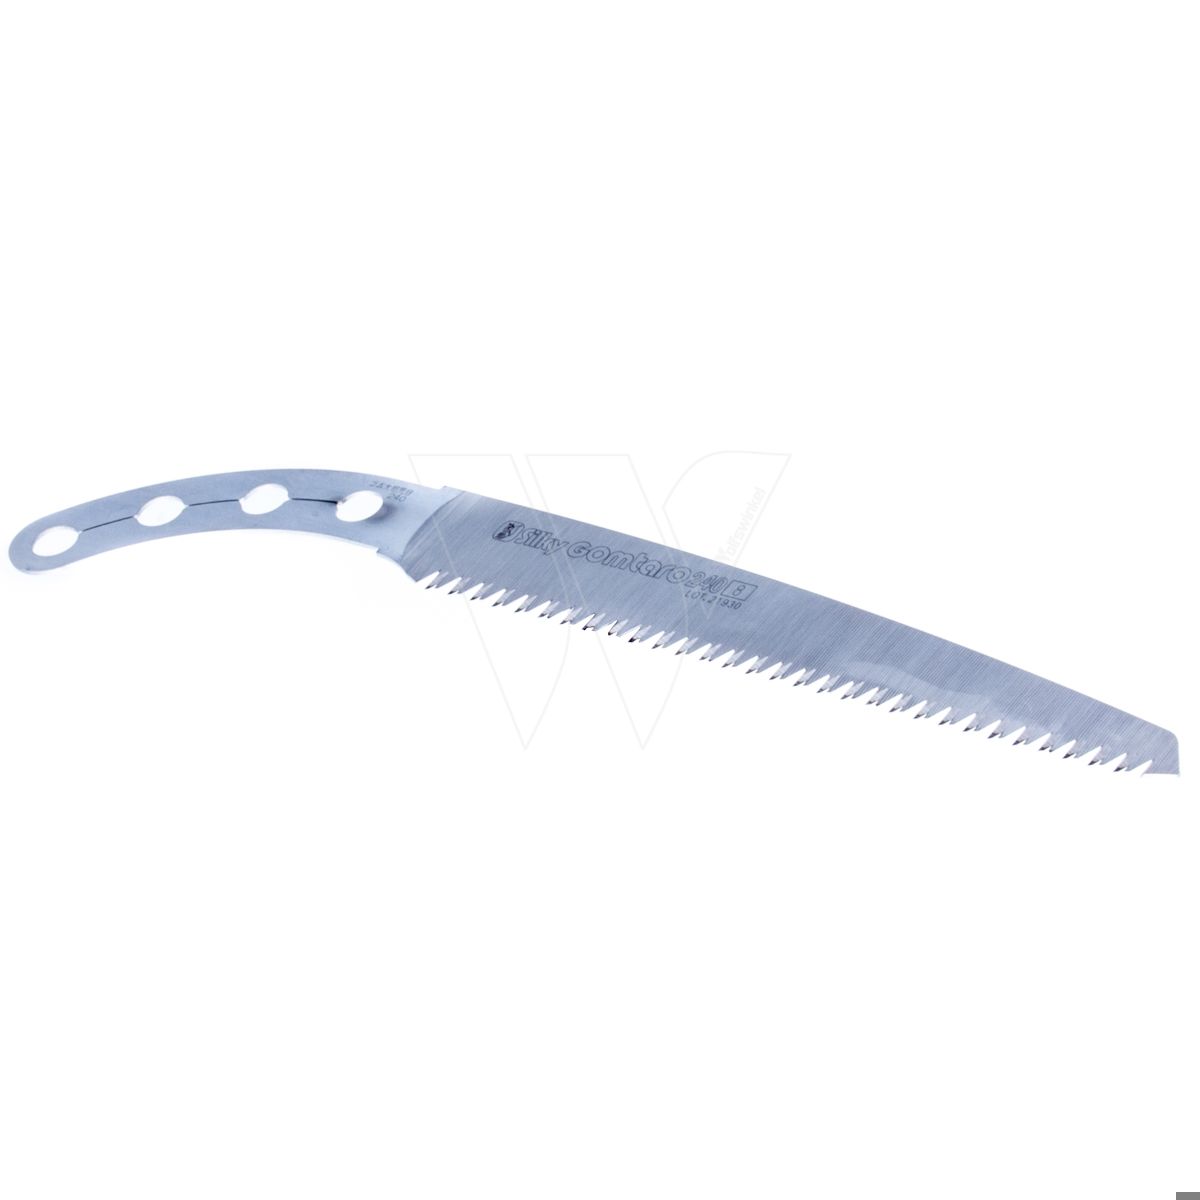 Silky replacement blade gomtaro 240-8